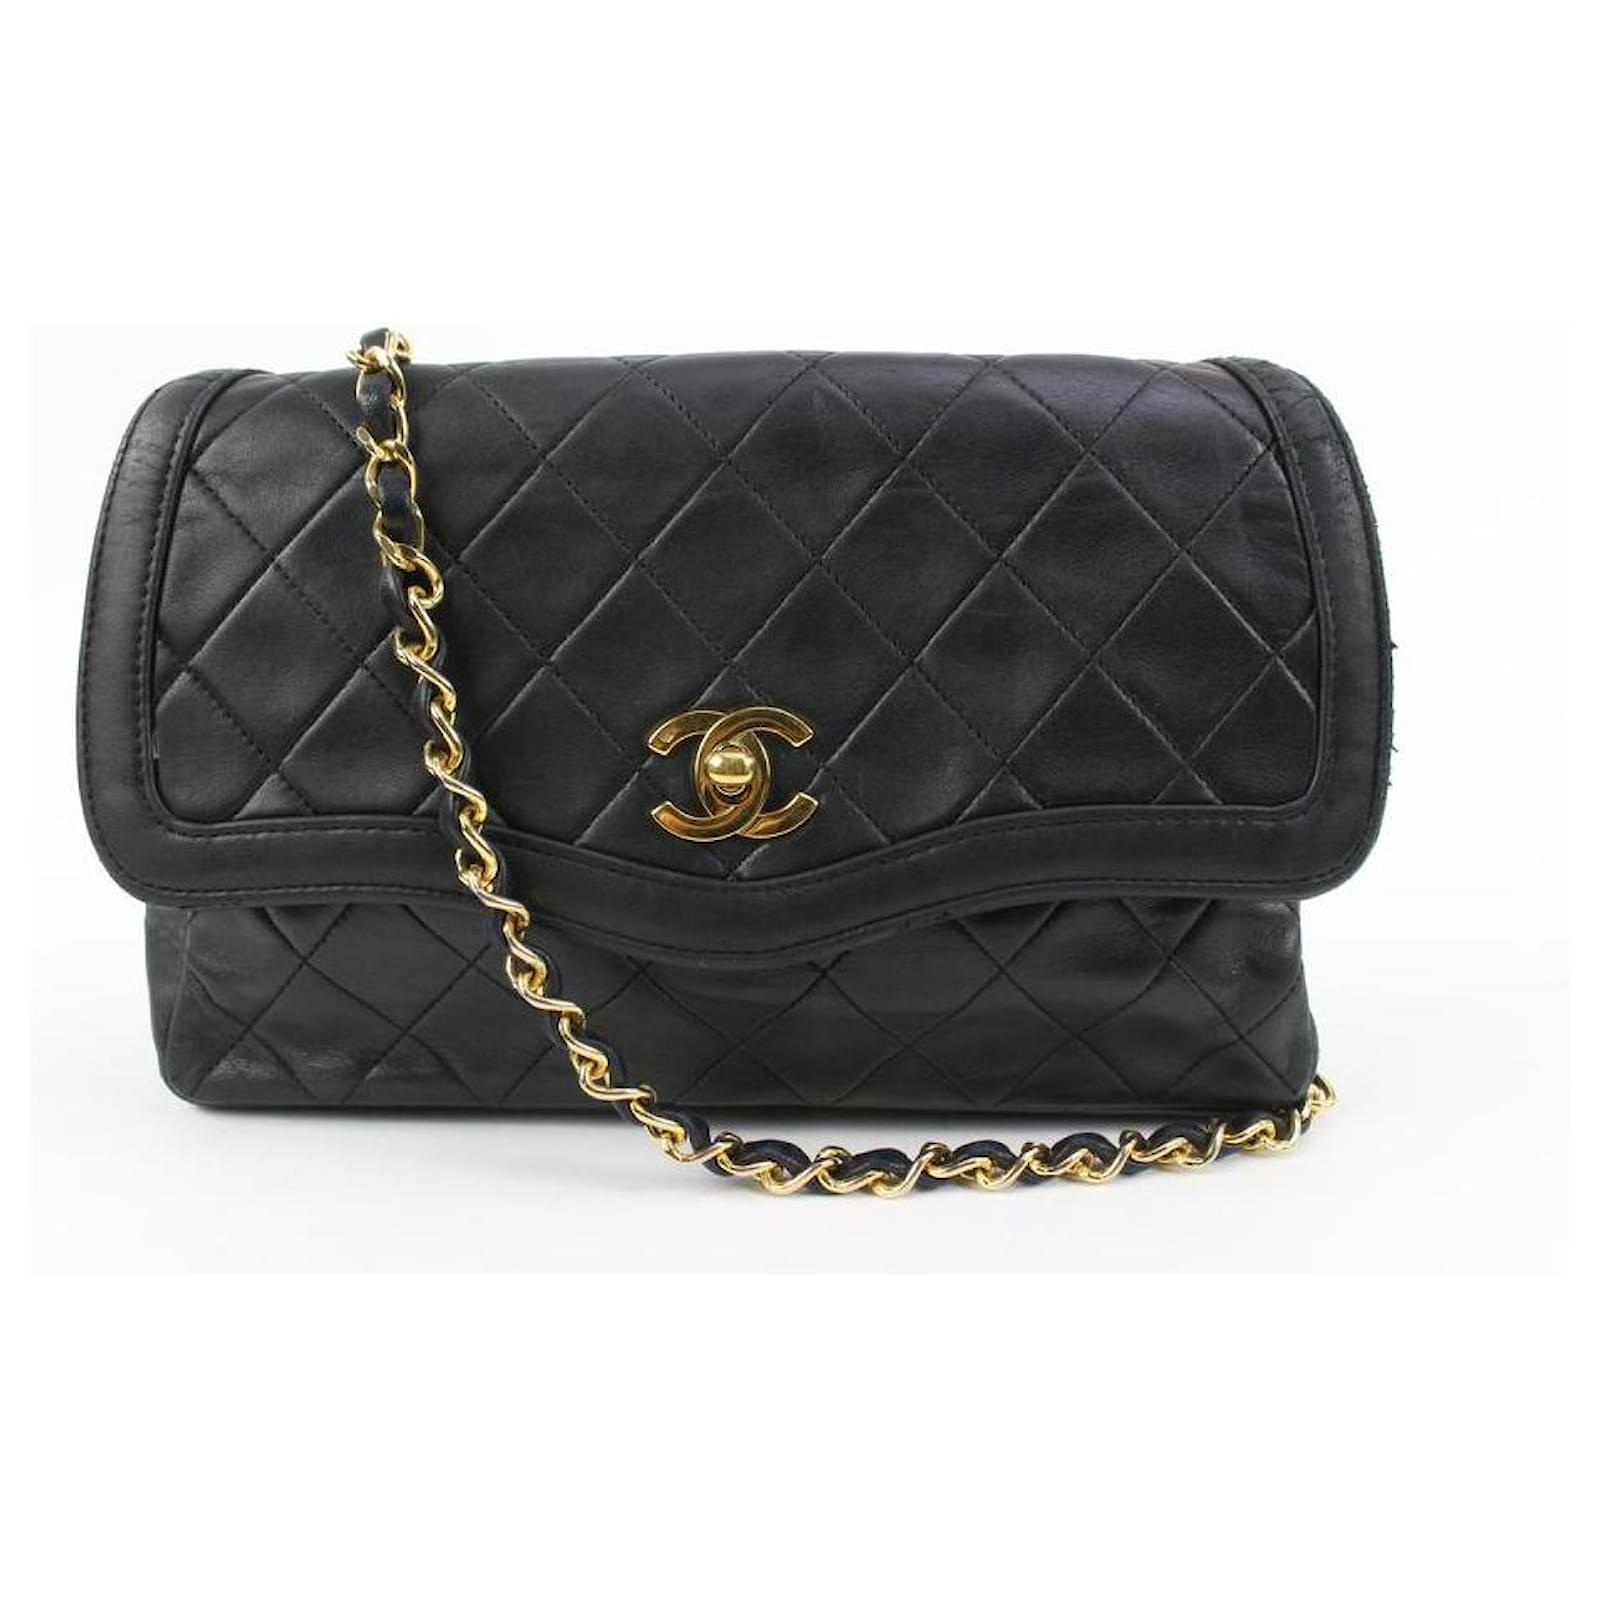 Chanel Vintage Chanel Black Quilted Leather Mini Gold Chain